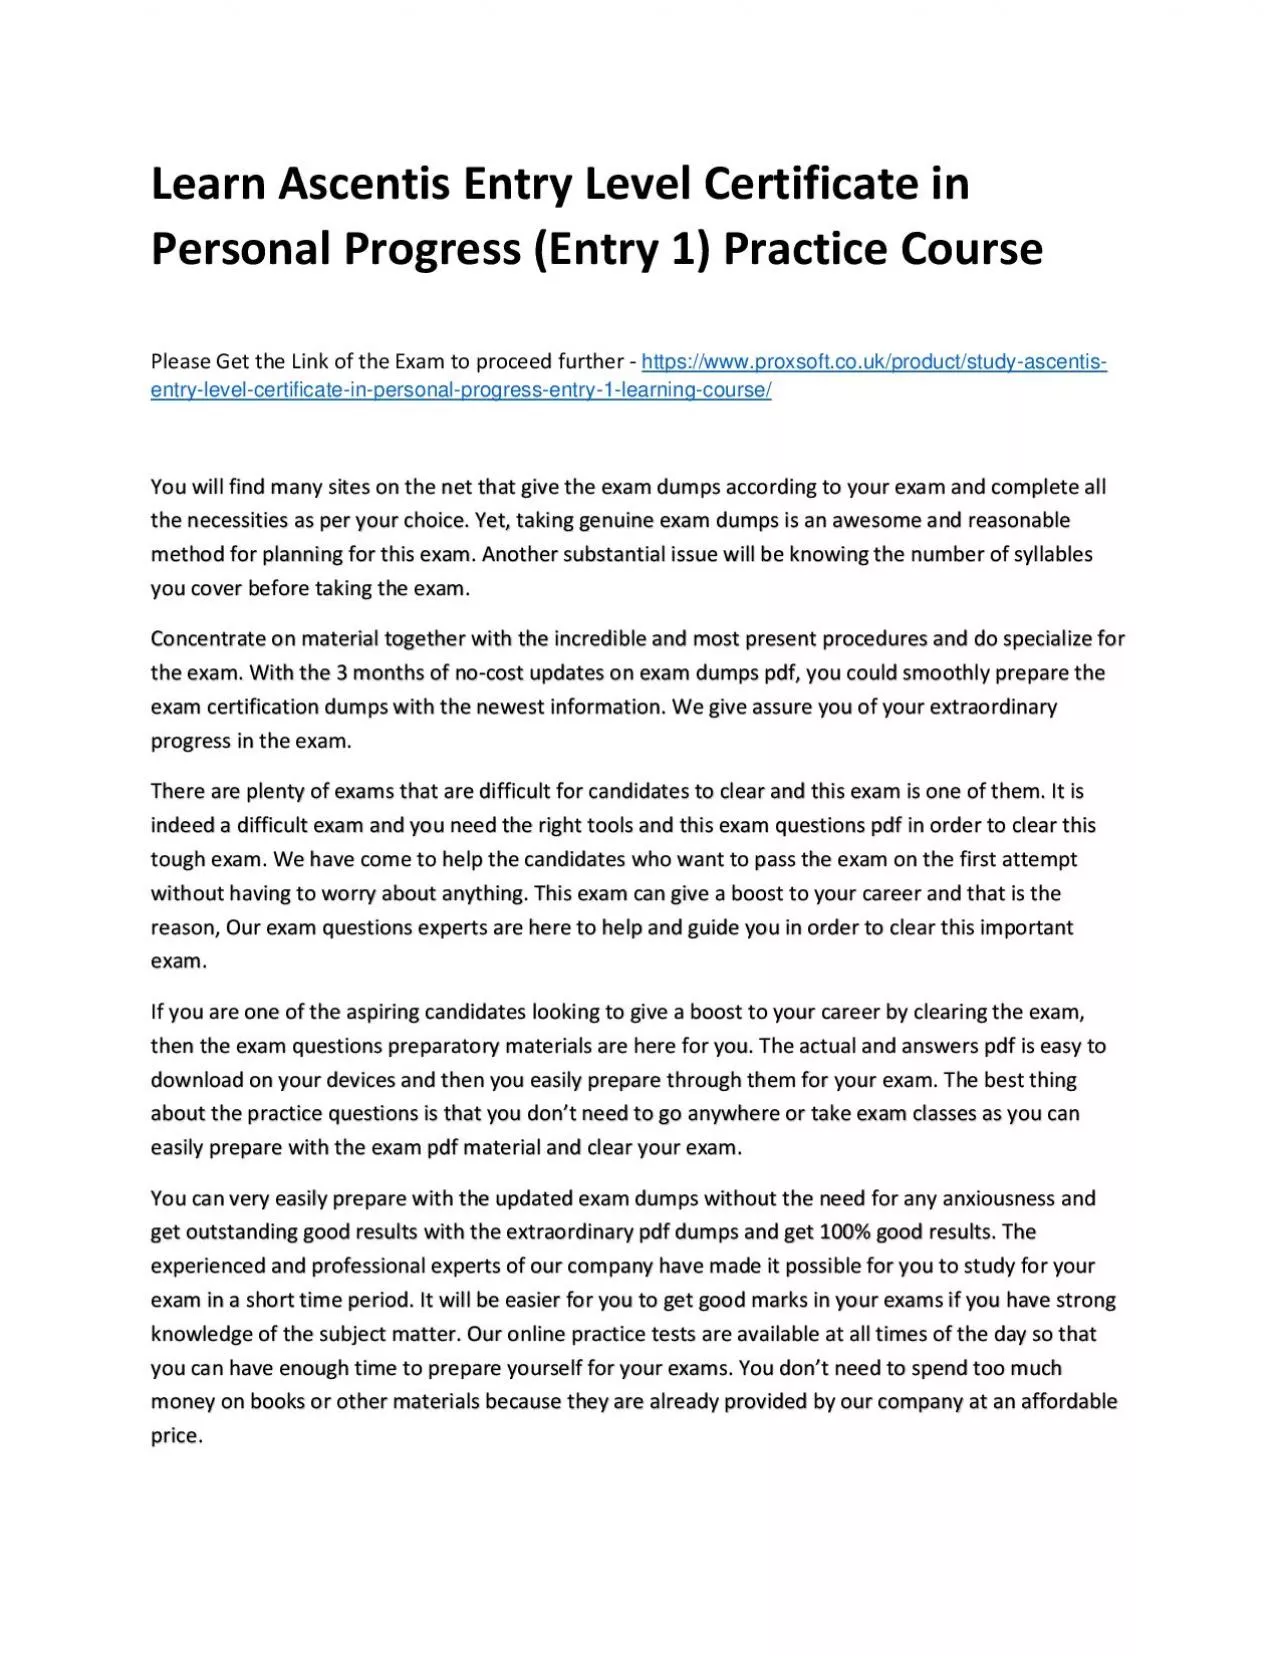 Learn Ascentis Entry Level Certificate in Personal Progress (Entry 1) Practice Course